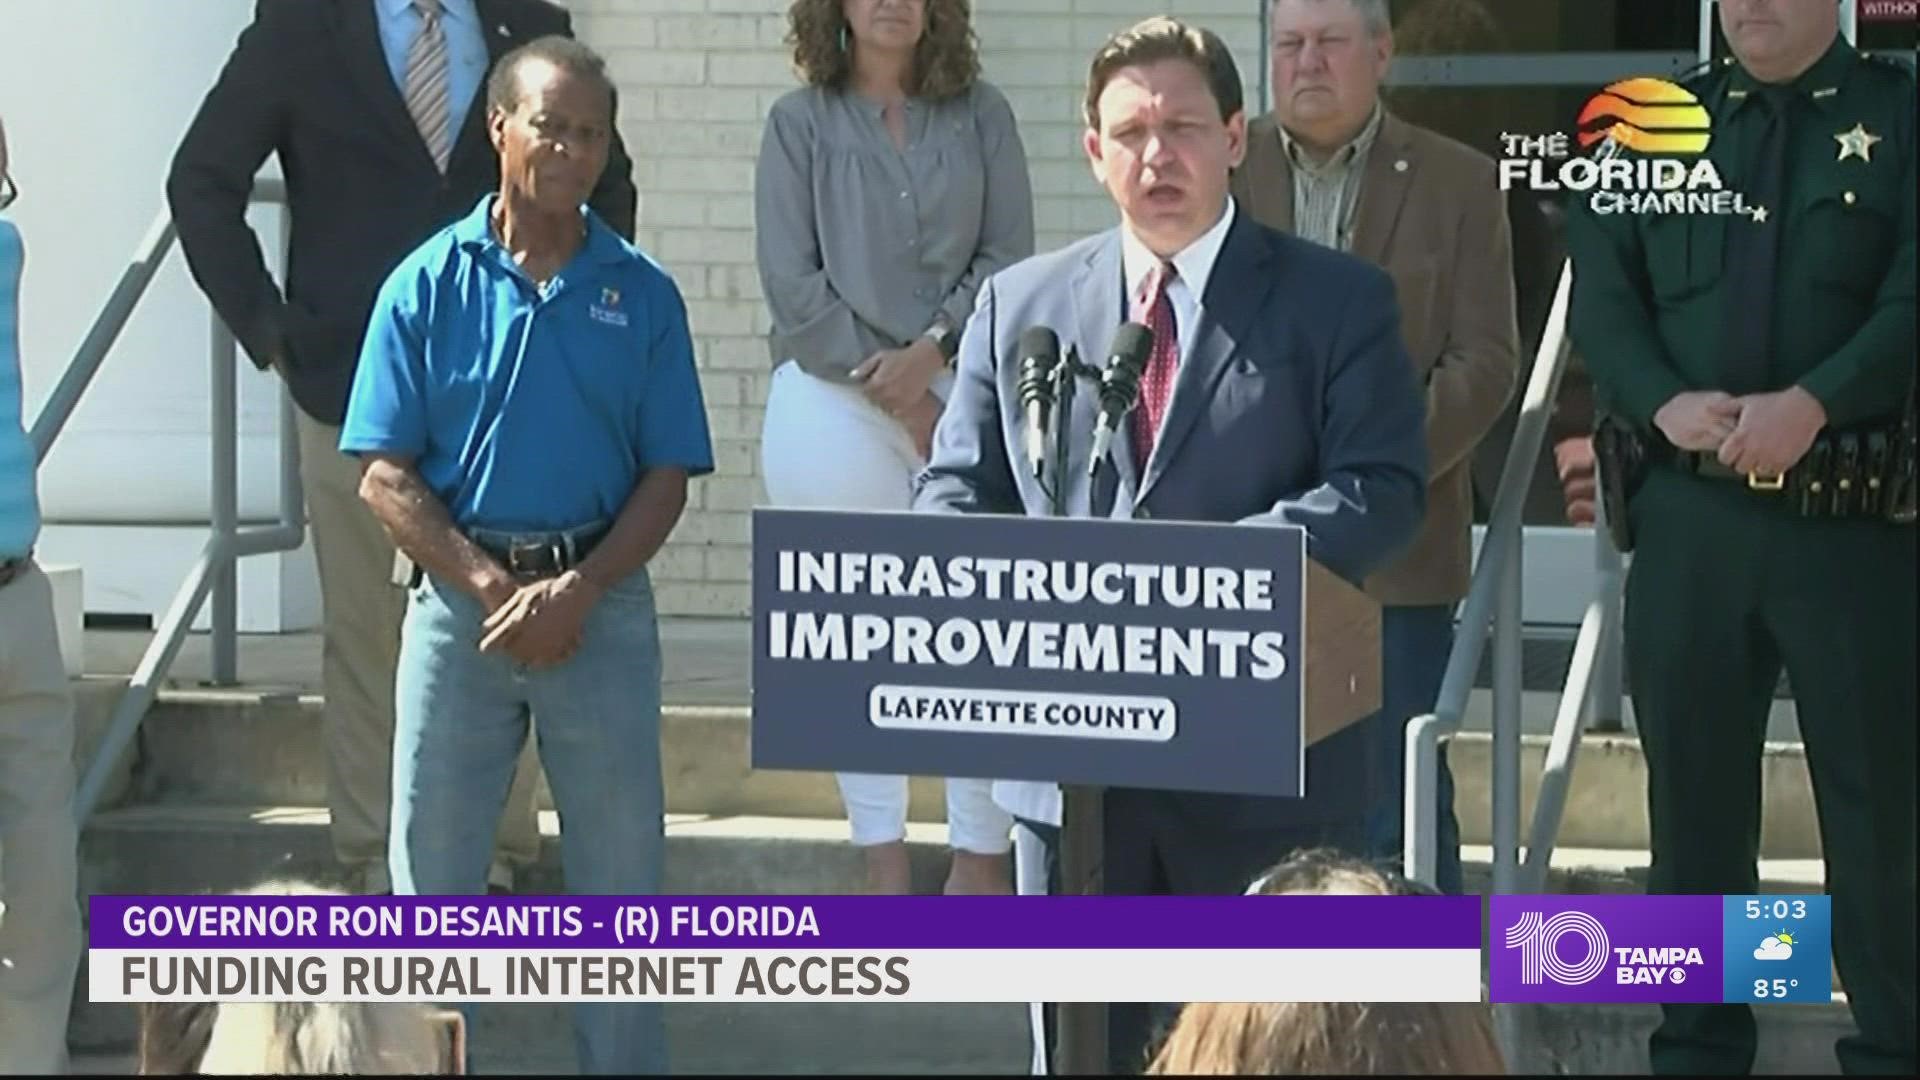 DeSantis hopes rural communities will benefit from the funding for internet access.